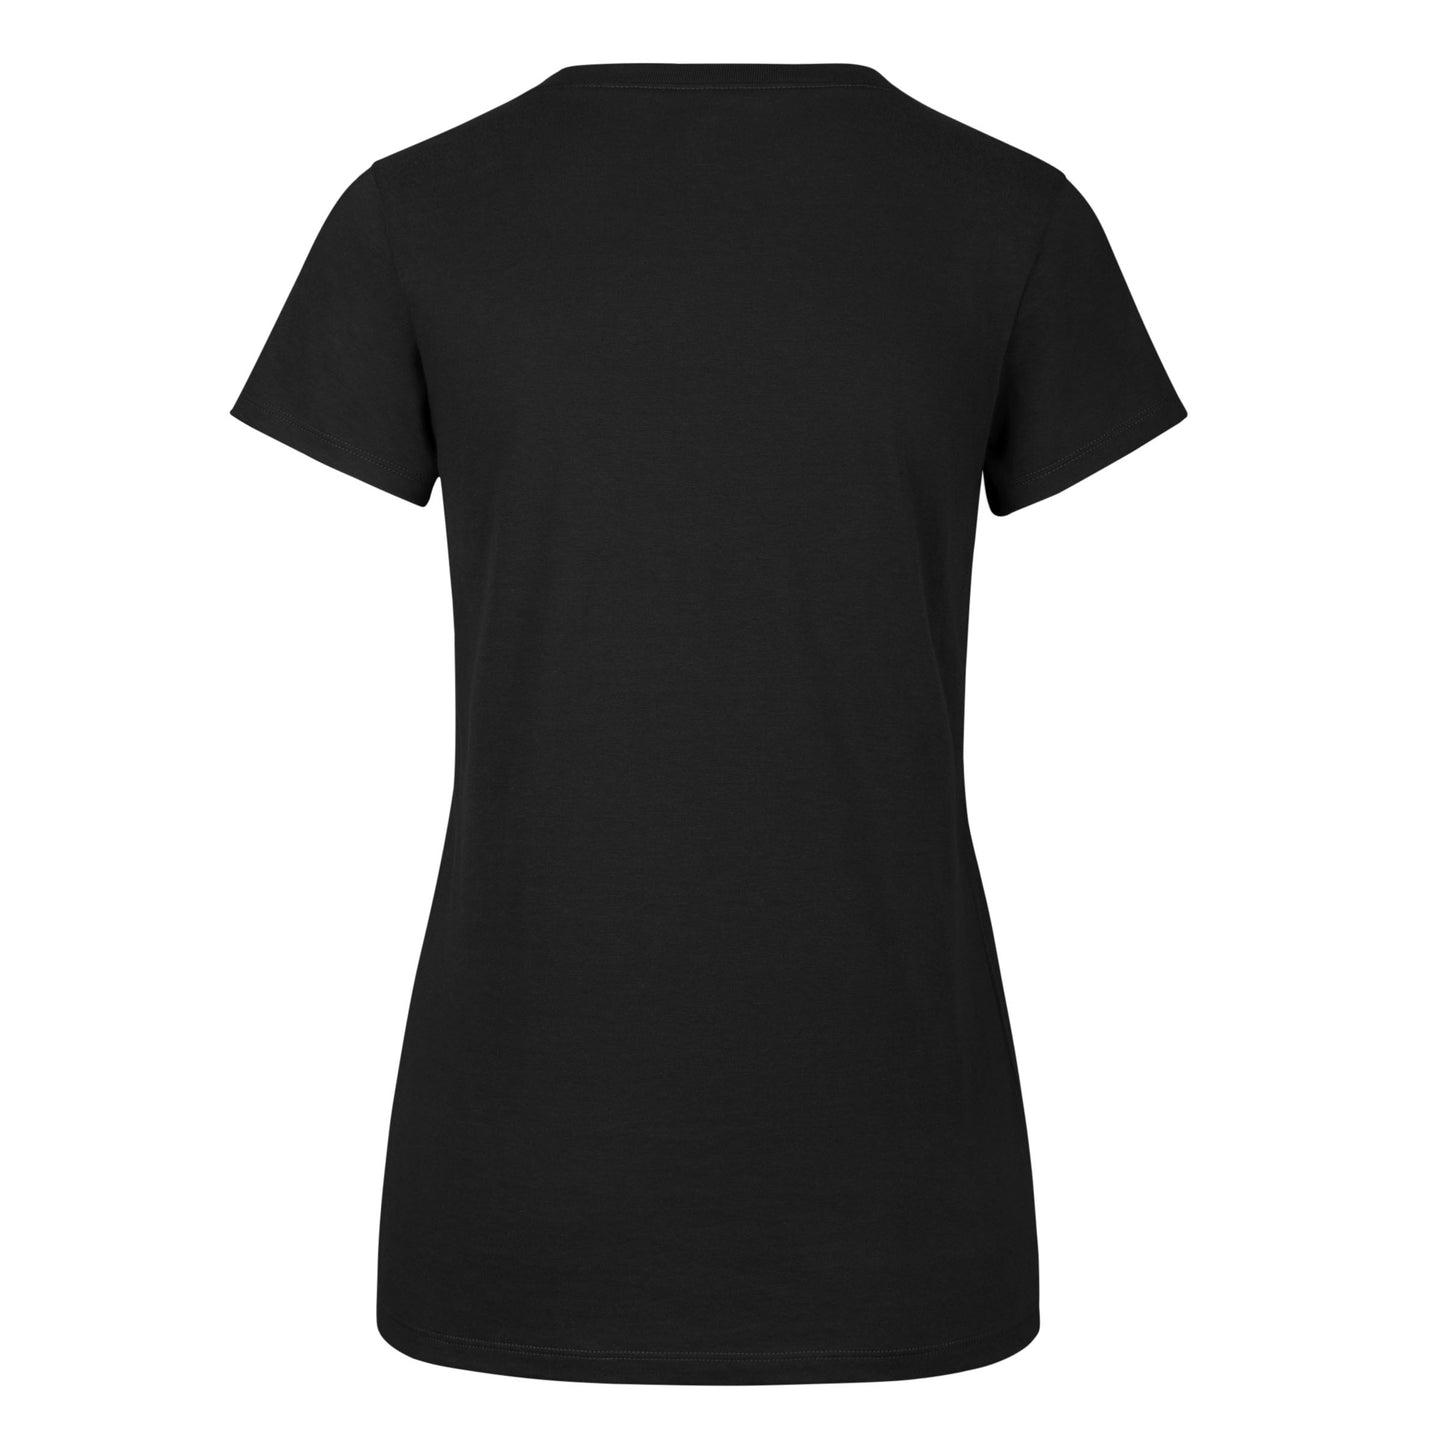 47 Brand Ladies Glimmer Ultra Rival Tee